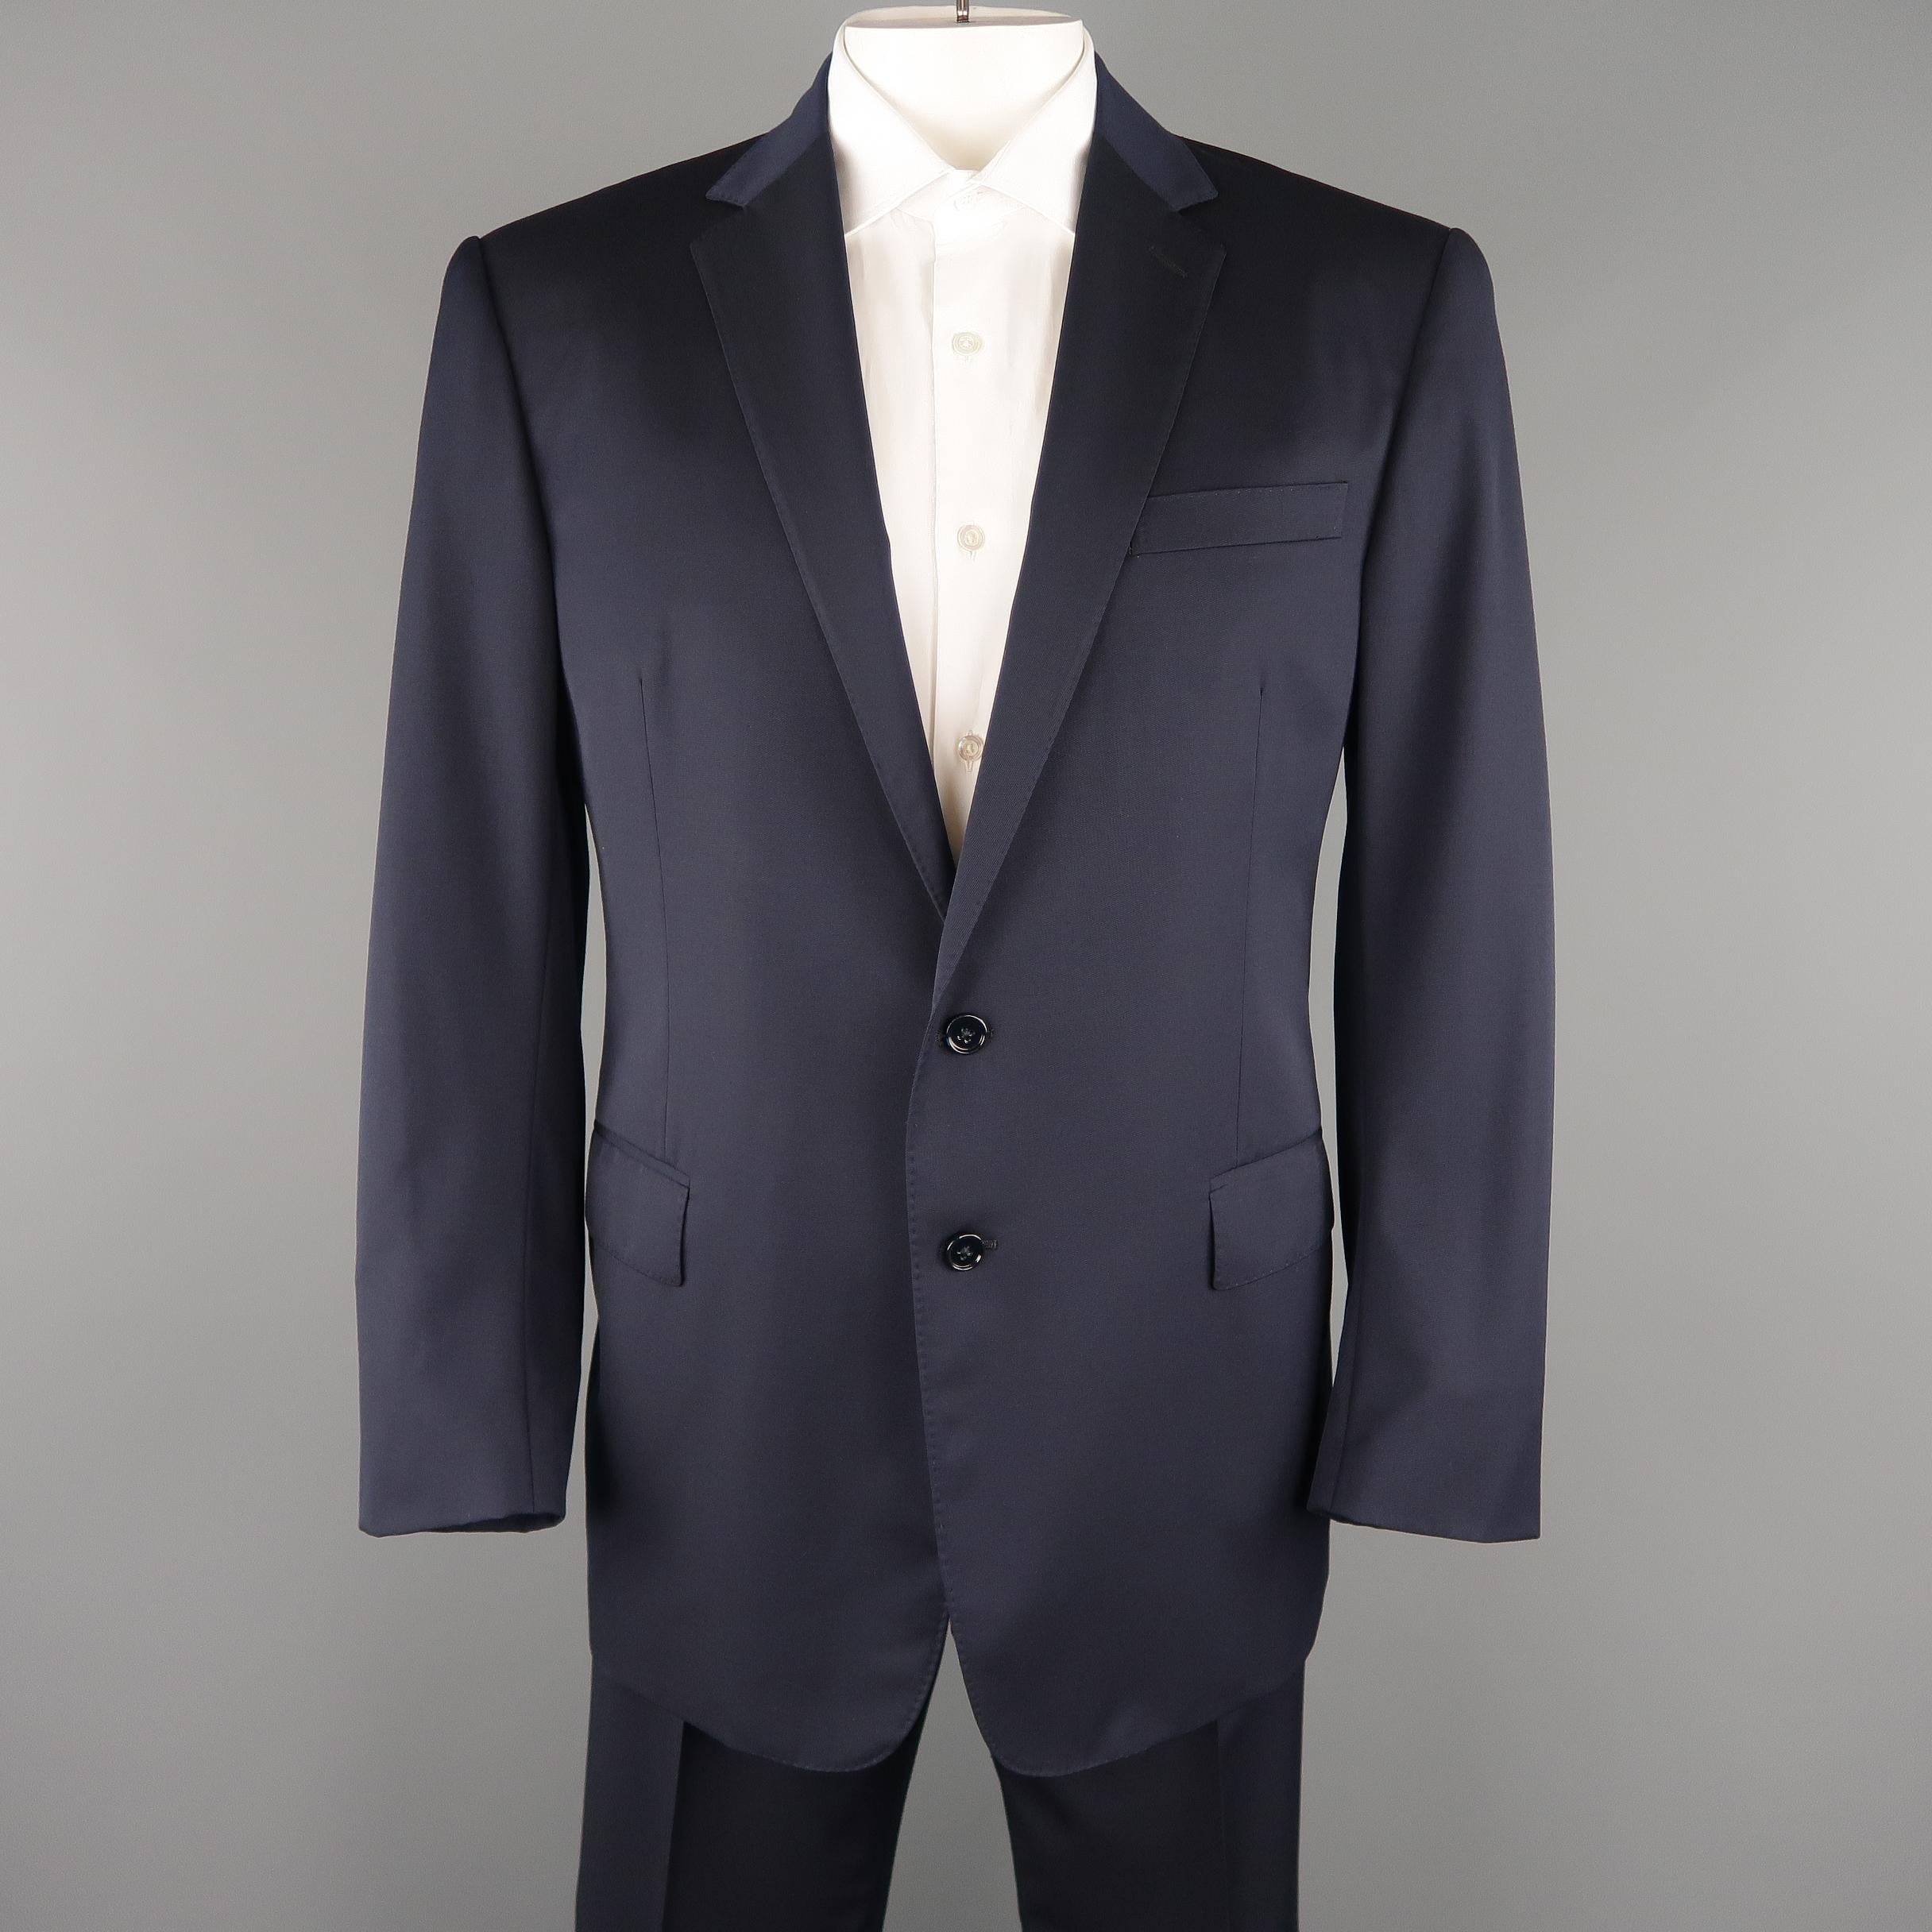 RALPH LAUREN BLACK LABEL suit comes in navy blue wool twill, lined in silk and features a single breasted, two button, notch lapel sport coat with top stitching and functional button cuffs with matching flay front trousers. 

Made in Italy.